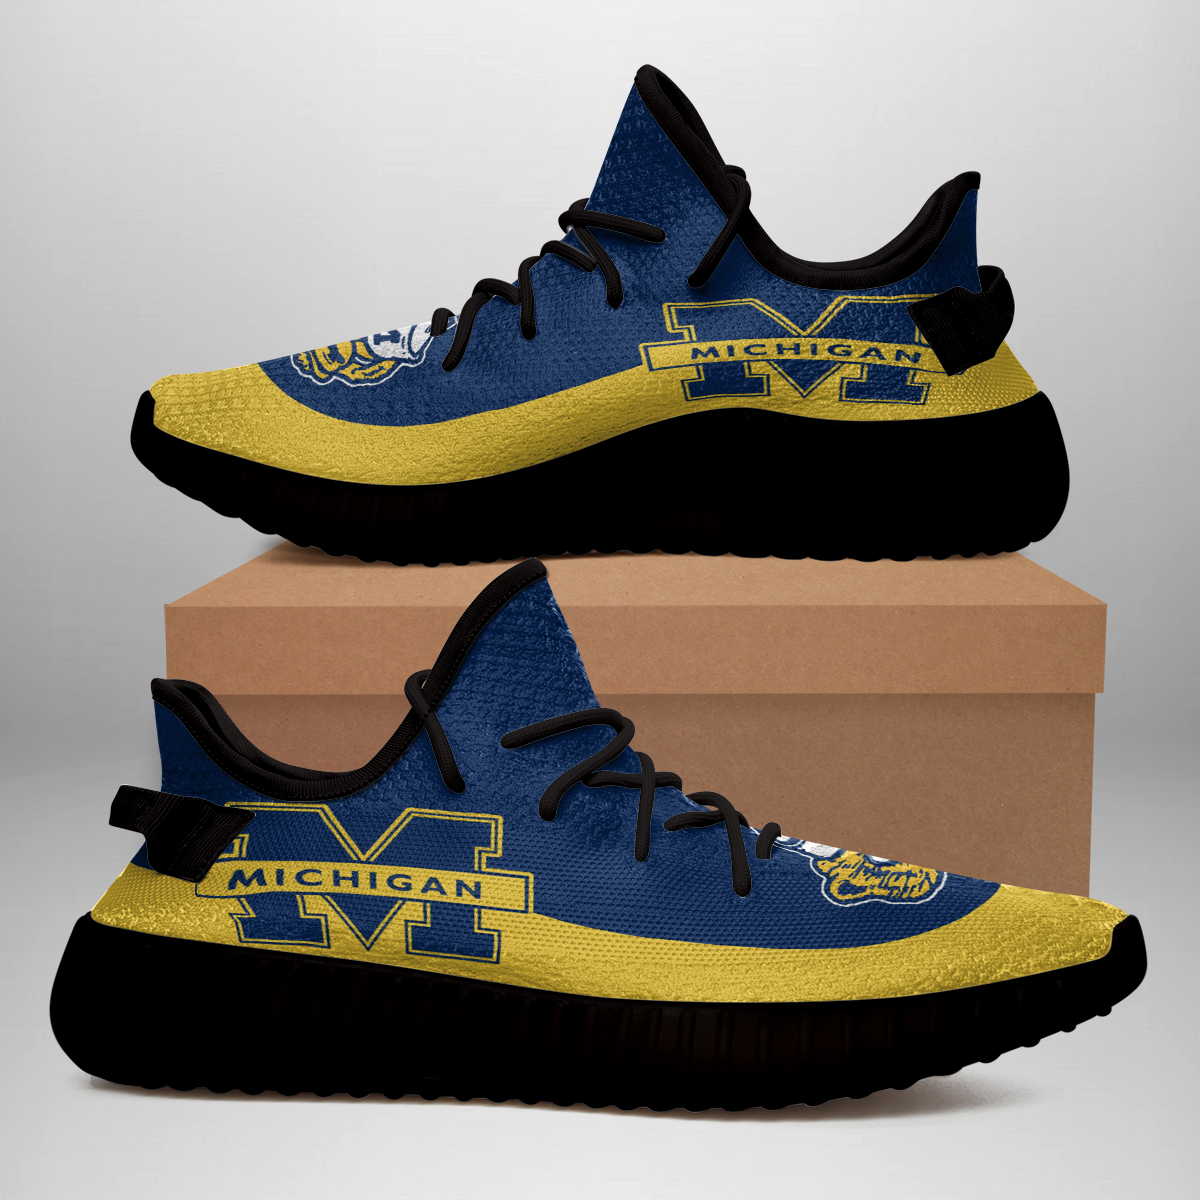 Michigan Wolverines Football Shoes Yeezy Shoes